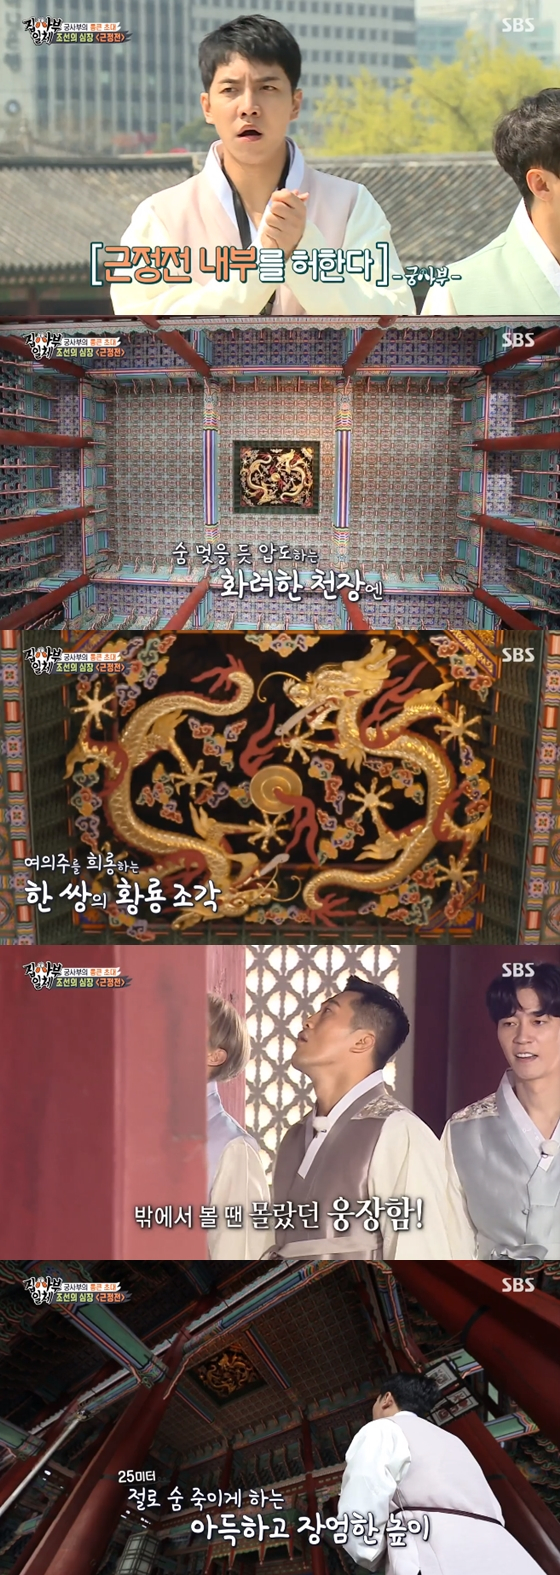 In the SBS entertainment program All The Butlers broadcasted on the afternoon of the afternoon, the whole gyeongbokgung was held for the first time in entertainment.As a guide for the master Gyeongbokgung, Choi Tae-seong, a Korean history teacher, and actor Kim Kang-hoon, who plays the daily Donggung, appeared.The first place they were headed for was the Geunjeongjeon, which was the first entertainment show to be released inside the Geunjeongjeon.Lee Seung-gi was surprised as soon as he entered, saying, Wow and that was there.Two yellow dragons were Pieced in Ceiling 25 meters above. Lee Seung-gi added I thought the floor was divided. He added admiration to the magnificent height.Choi Tae-seong then noticed the number of claws of Hwangryong Piece and explained that he wanted to establish the authority of the king rather than the emperor.